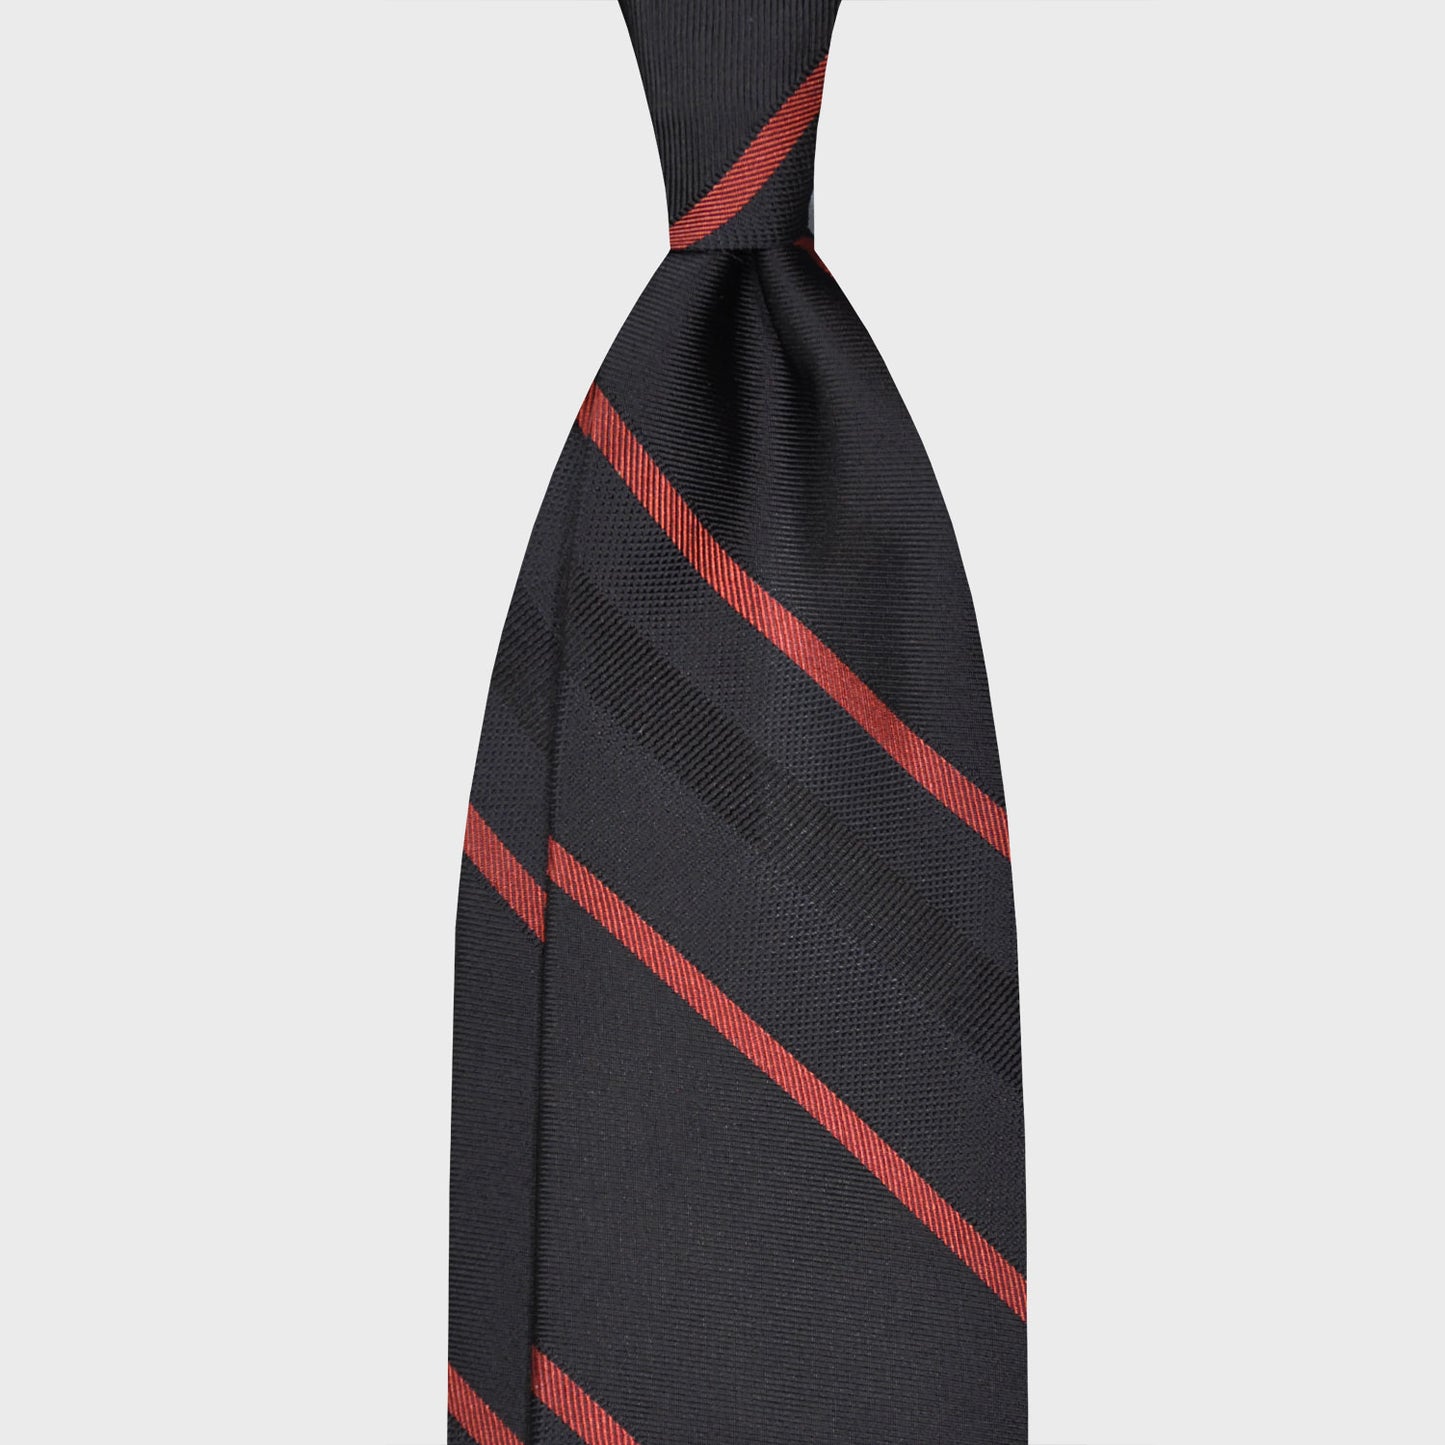 Black Silk Necktie Striped. Elegant striped silk tie, refined black background with lobster red striped, handmade in Italy by F.Marino Napoli exclusive for Wools Boutique Uomo, unlined regimental necktie 3 folds hand rolled edge.